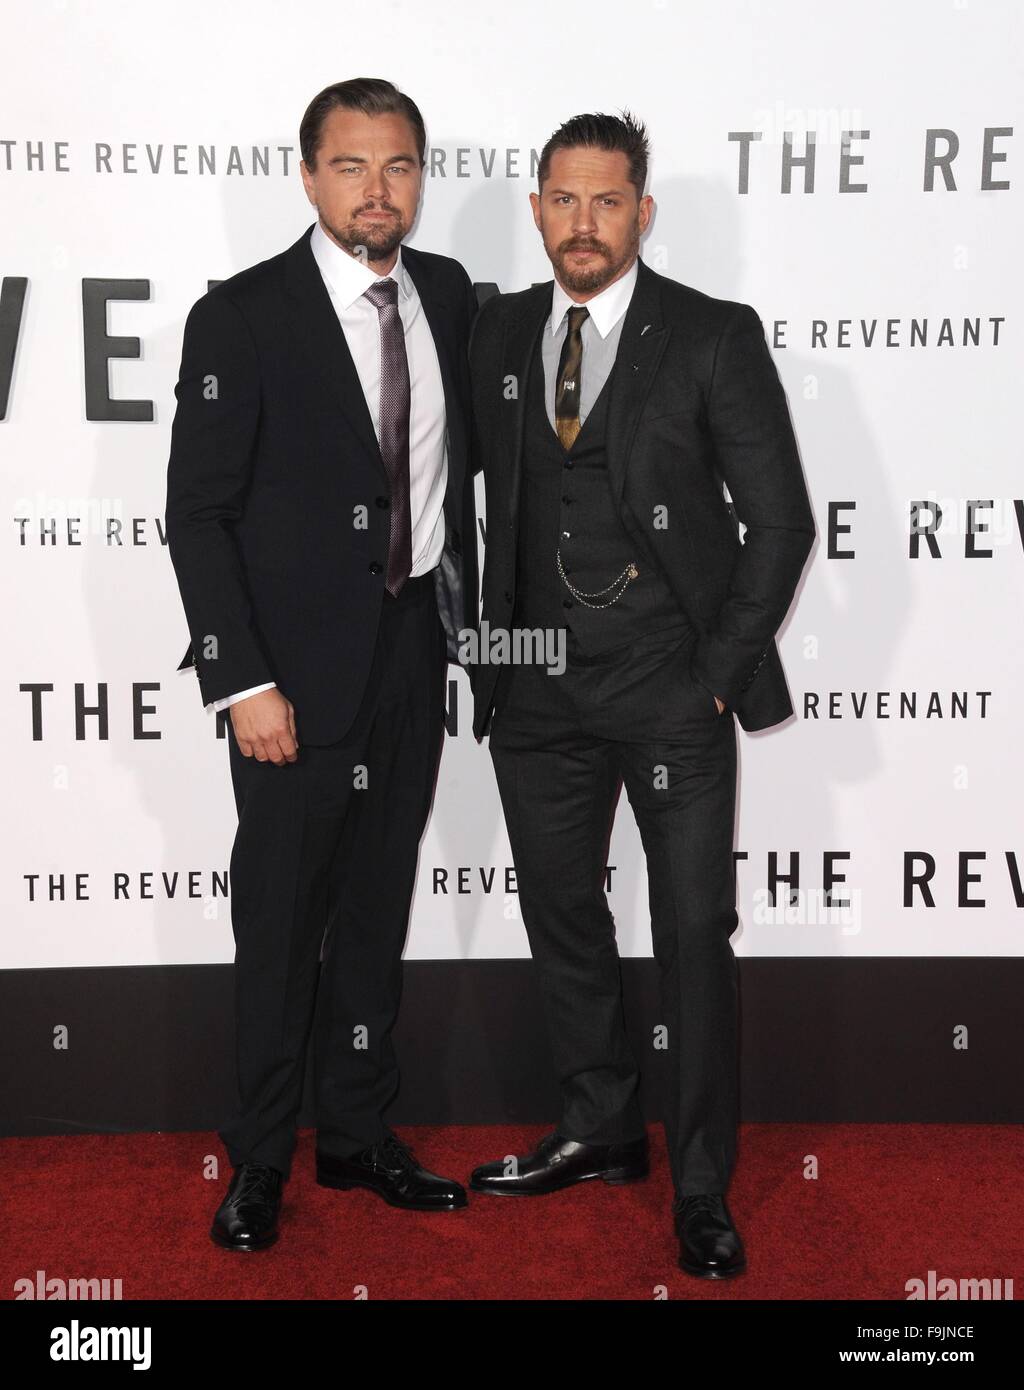 Los Angeles, CA, USA. 16th Dec, 2015. Leonardo Dicaprio, Tom Hardy at arrivals for THE REVENANT World Premiere, TCL Chinese 6 Theatres (formerly Grauman's), Los Angeles, CA December 16, 2015. Credit:  Dee Cercone/Everett Collection/Alamy Live News Stock Photo